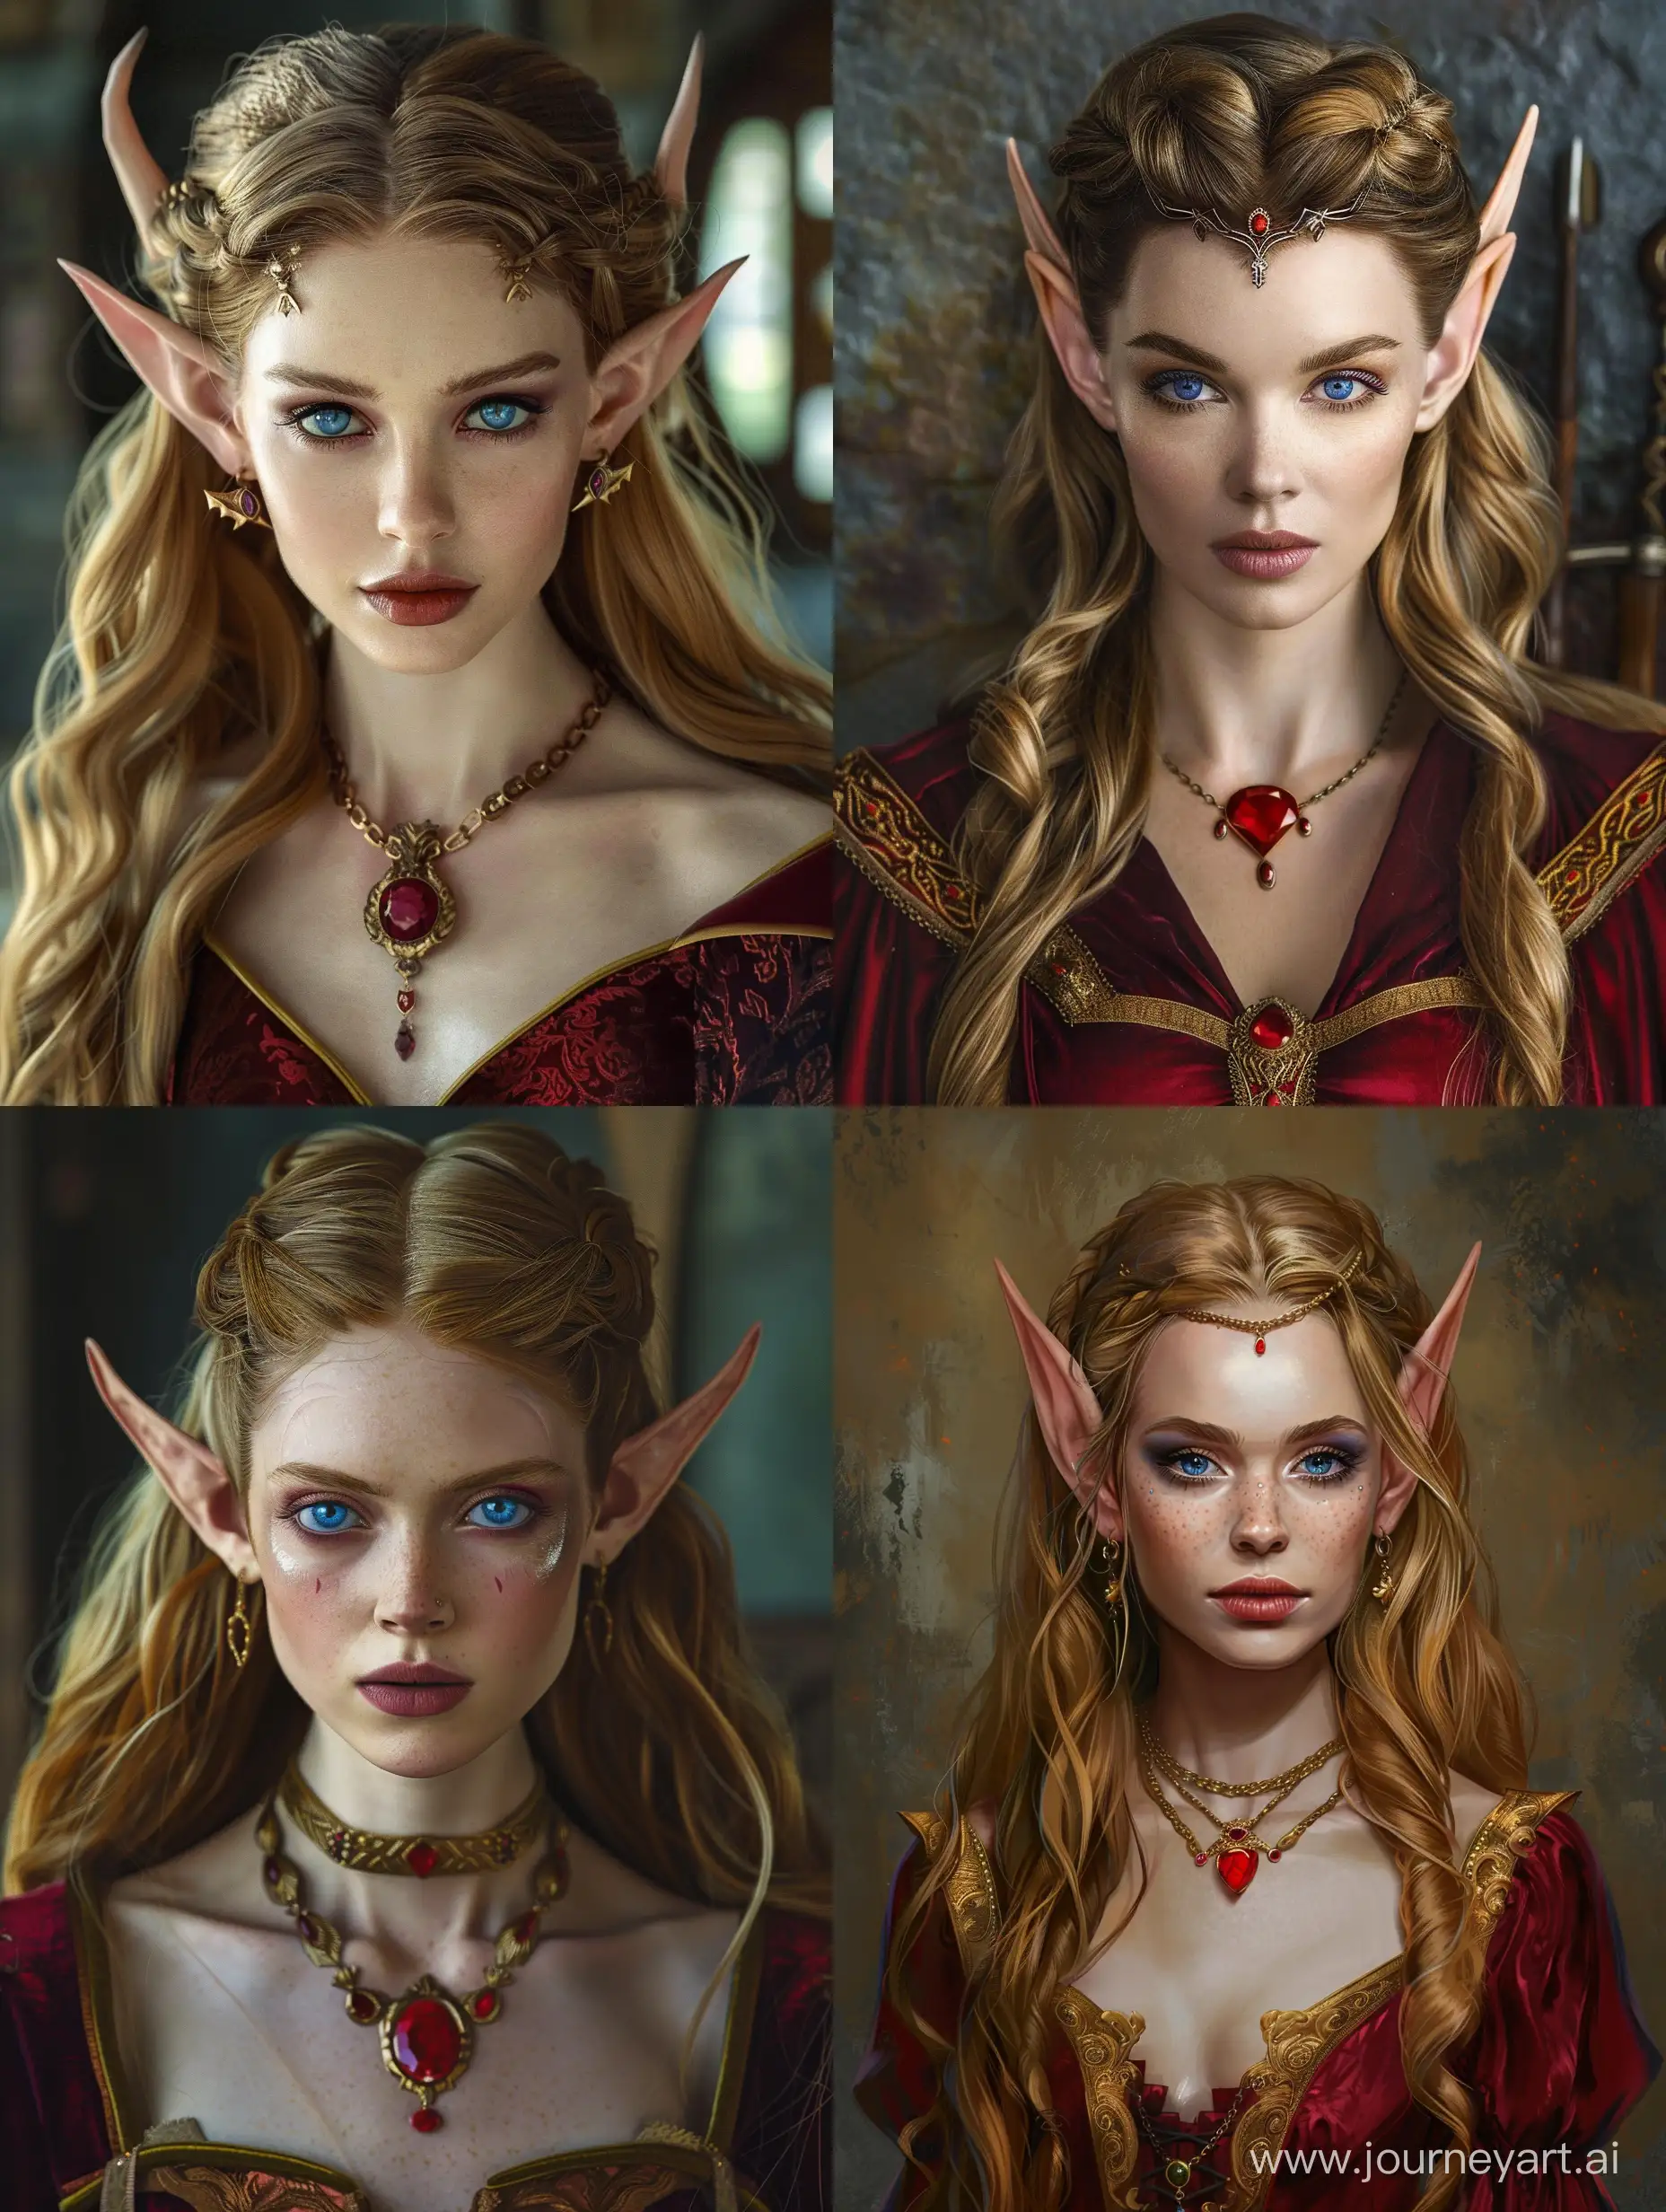 Francesca Findabair: Most beautiful woman in the world, her blue, elven eyes ringed with dark kohl make-up. She had long golden hair worn in majestic hairstyles and wore a lavish crimson dress and a red Ruby necklace. Sharp Elven features, and long pointed ears. Use Vanessa Kirby's face as a model. 